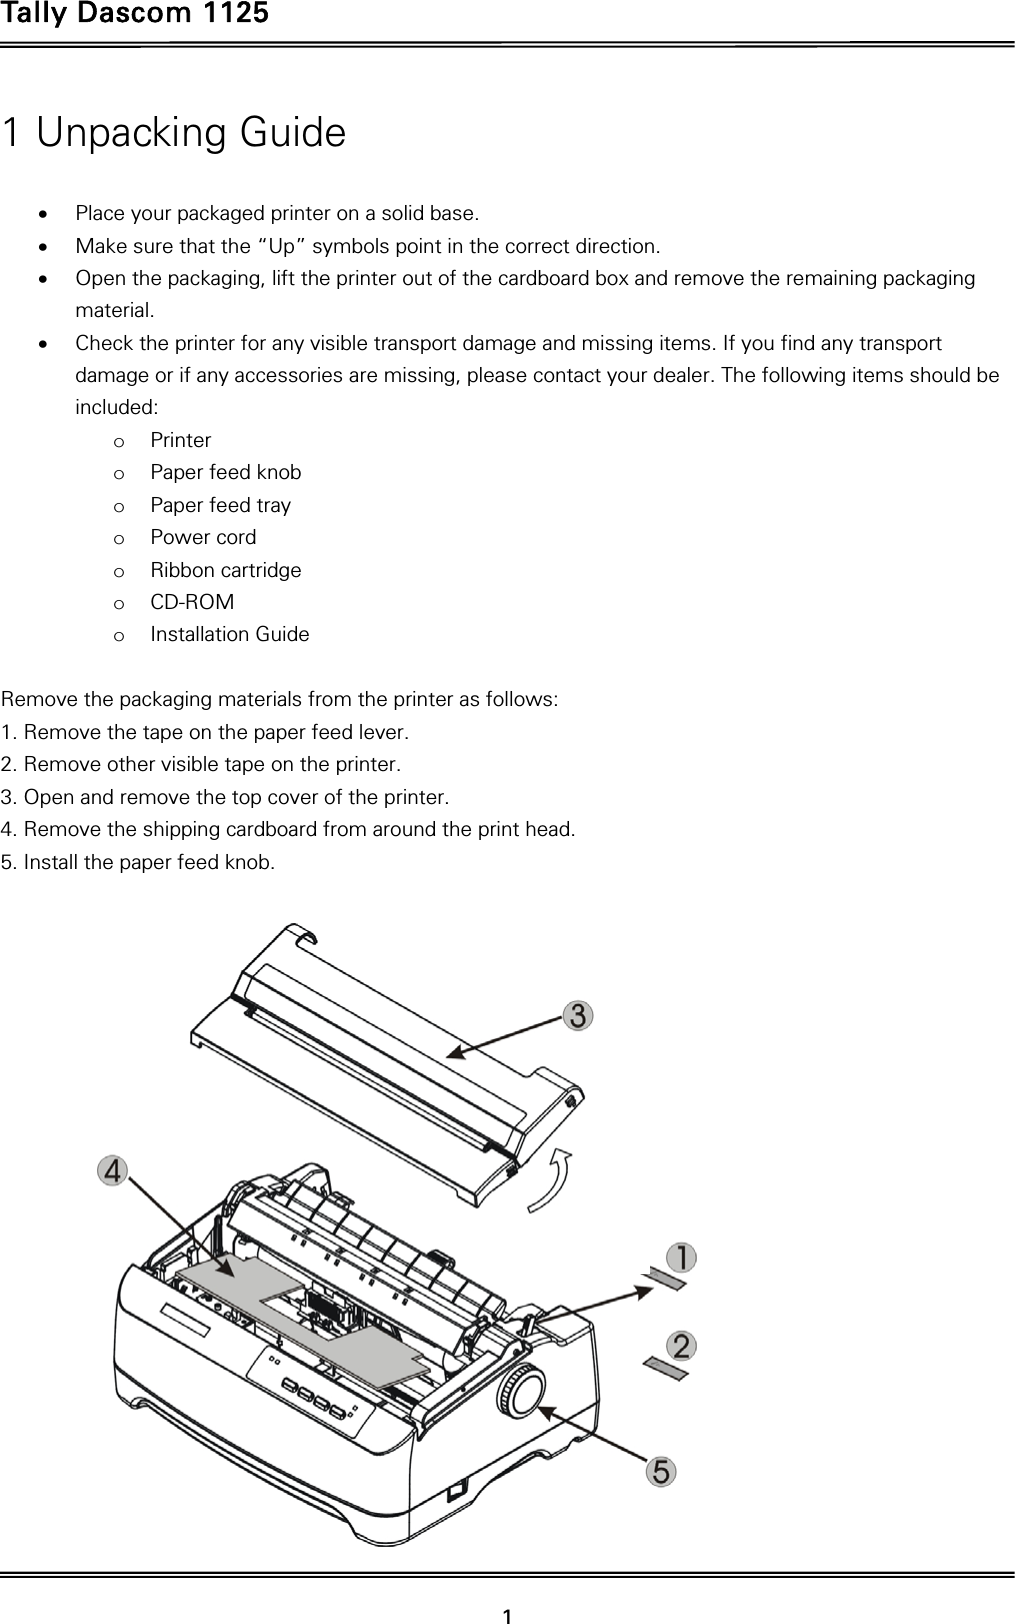 Tally Dascom 1125 11 Unpacking Guide  xPlace your packaged printer on a solid base. xMake sure that the “Up” symbols point in the correct direction. xOpen the packaging, lift the printer out of the cardboard box and remove the remaining packaging material. xCheck the printer for any visible transport damage and missing items. If you find any transport damage or if any accessories are missing, please contact your dealer. The following items should be included: oPrinter oPaper feed knob oPaper feed tray oPower cord oRibbon cartridge oCD-ROM oInstallation Guide  Remove the packaging materials from the printer as follows: 1. Remove the tape on the paper feed lever. 2. Remove other visible tape on the printer. 3. Open and remove the top cover of the printer. 4. Remove the shipping cardboard from around the print head. 5. Install the paper feed knob.   